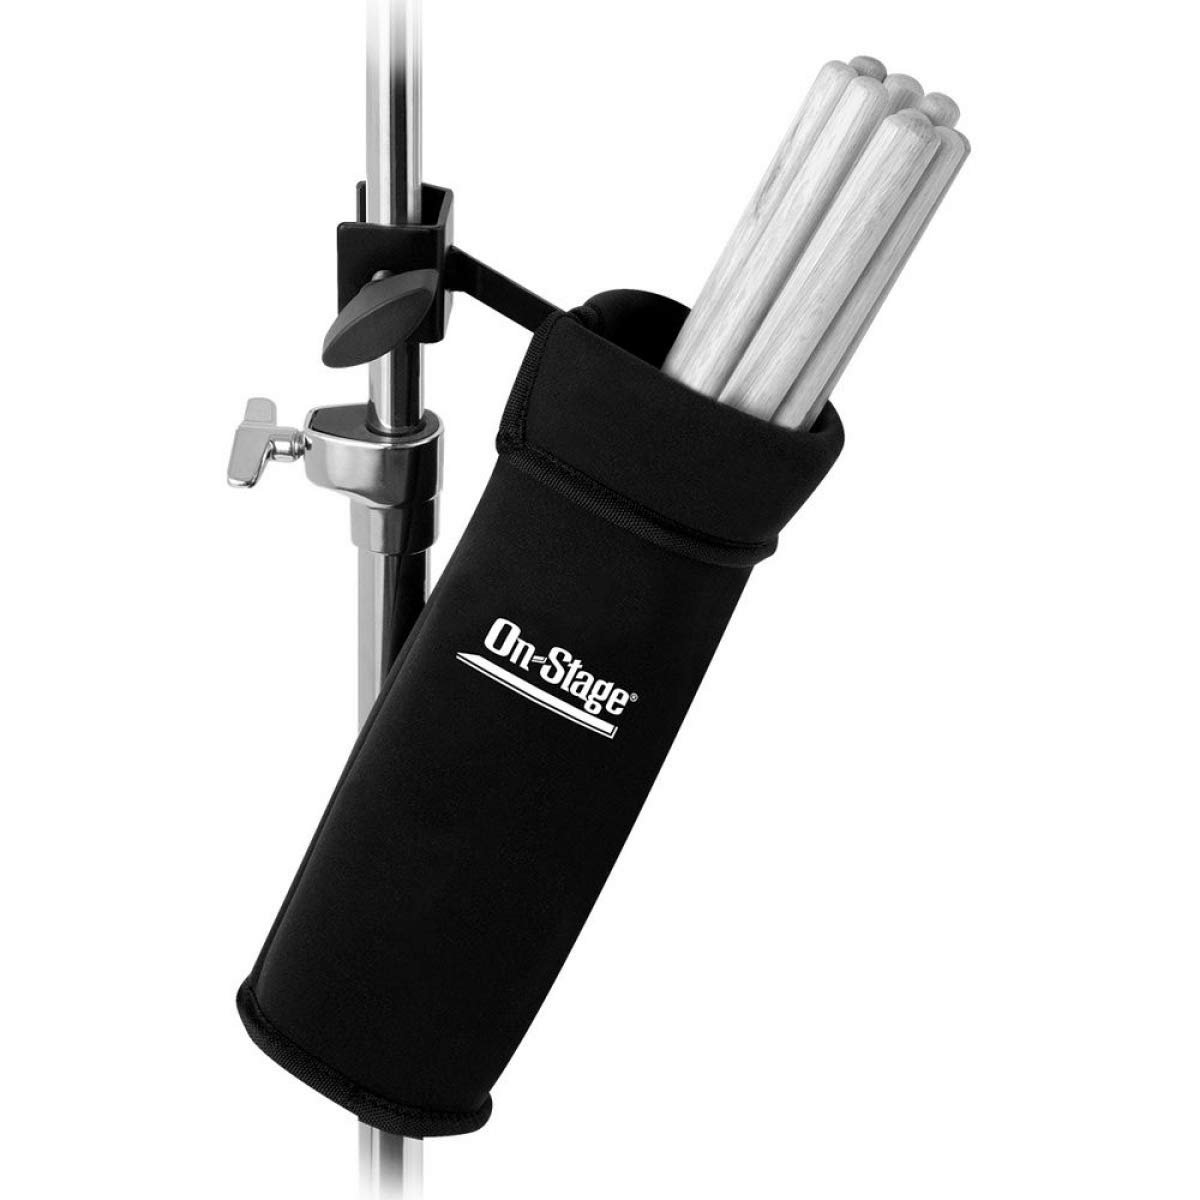 Best Drum Stick Holder Available in the Market